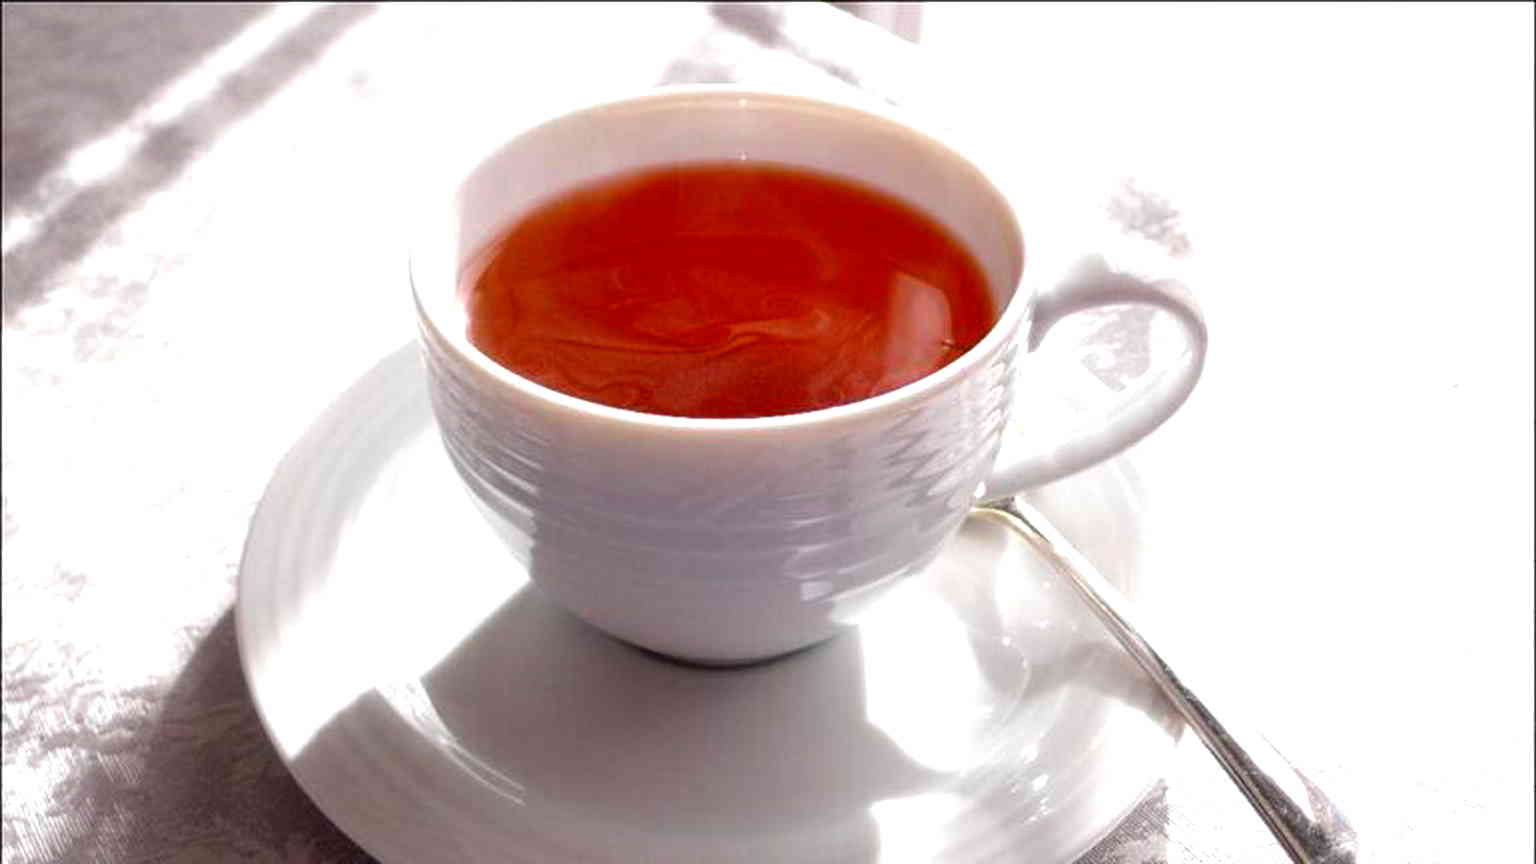 Drinking 3 cups of tea daily could delay aging, study suggests